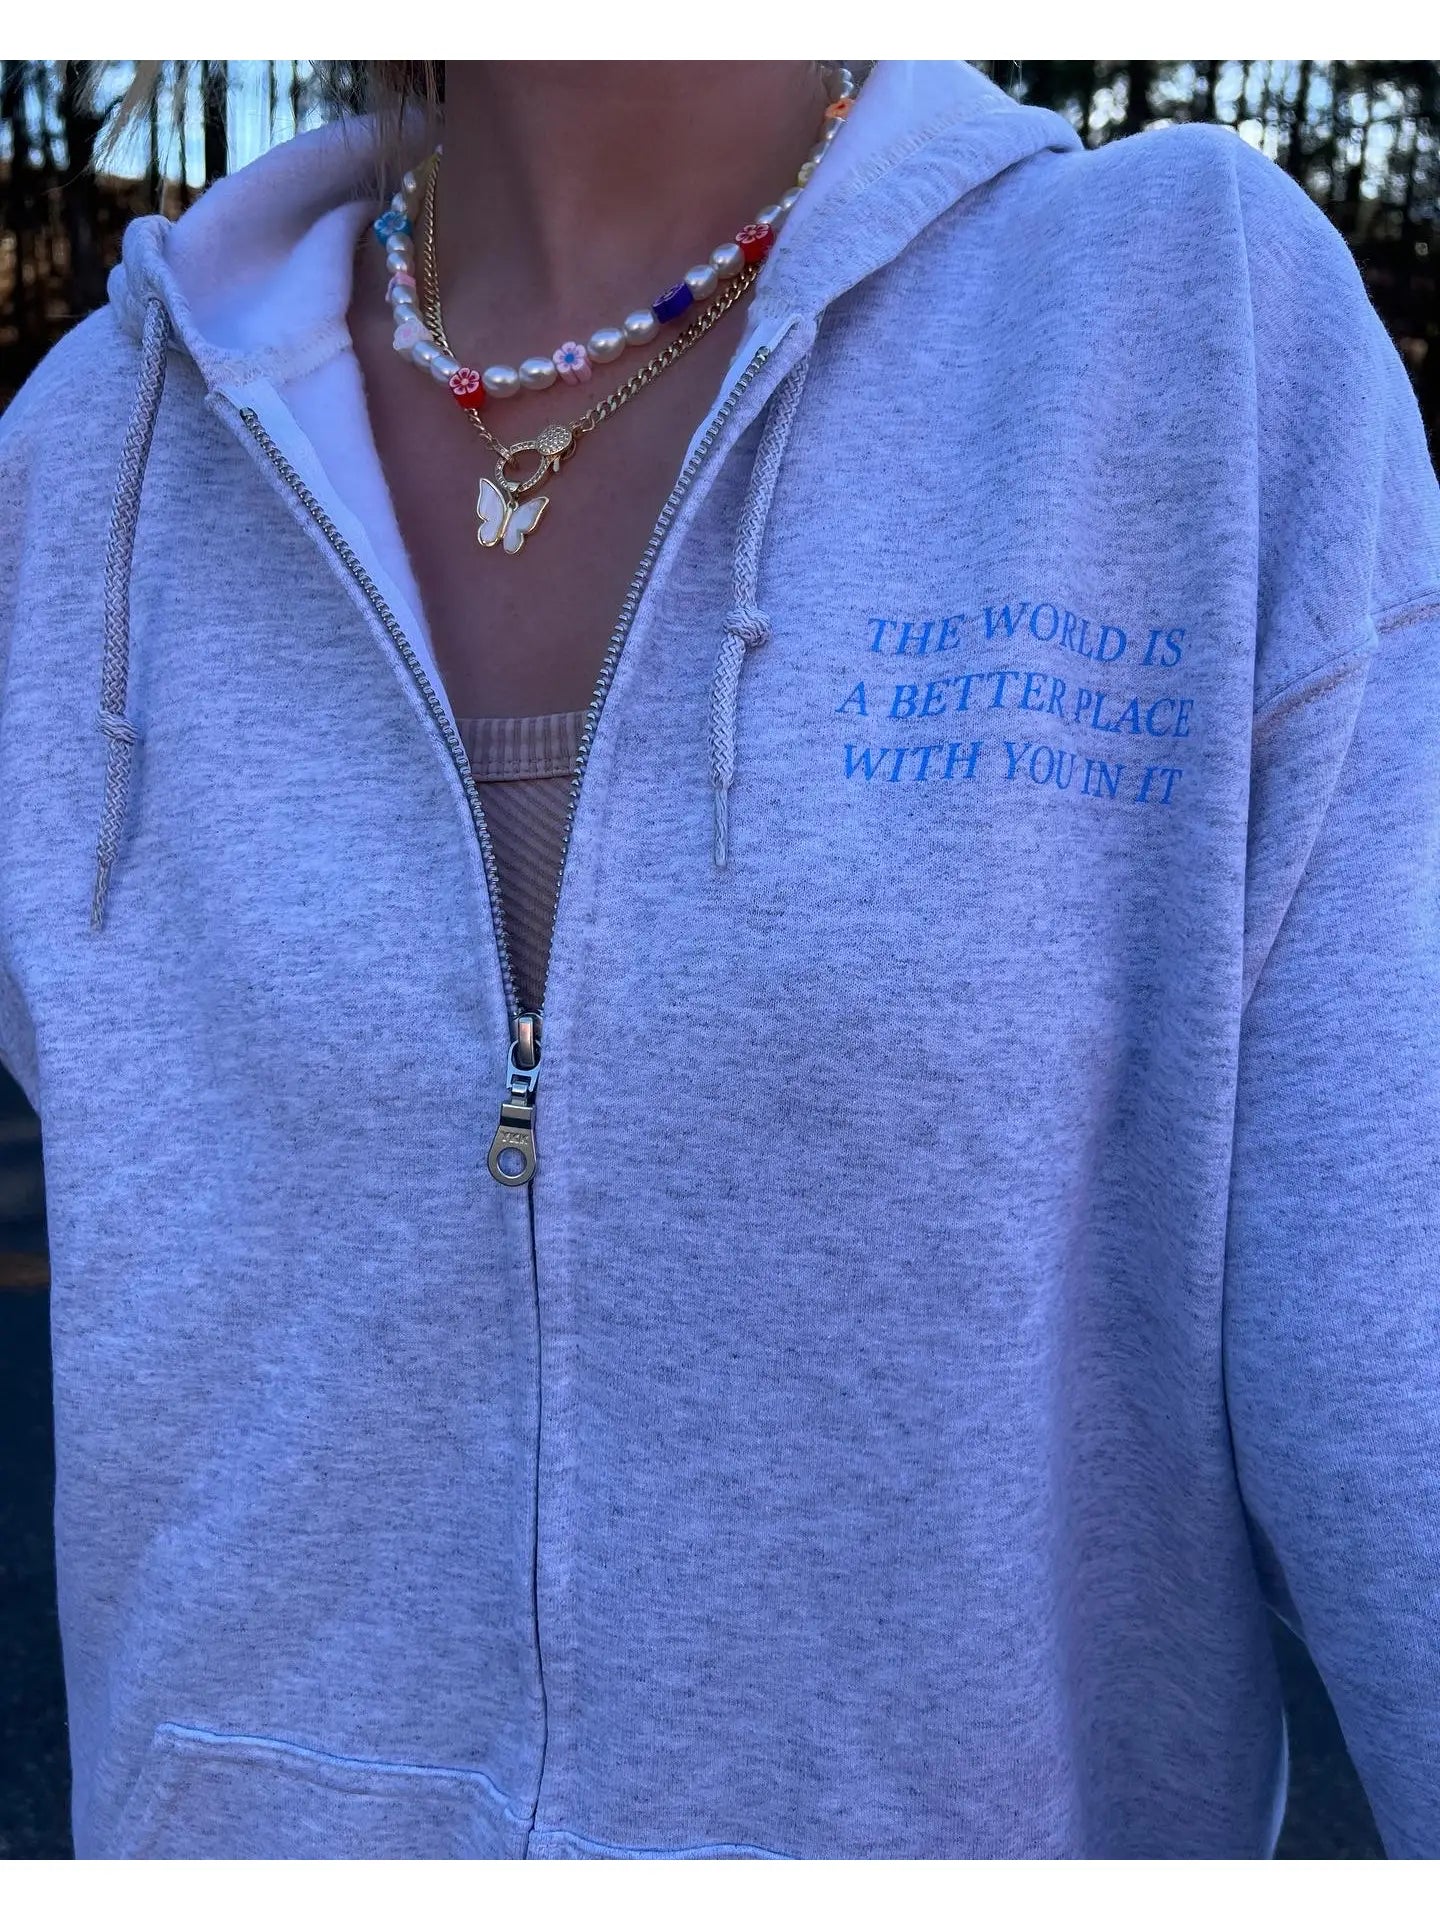 THE WORLD IS A BETTER PLACE WITH YOU IN IT ZIP UP HOODIE